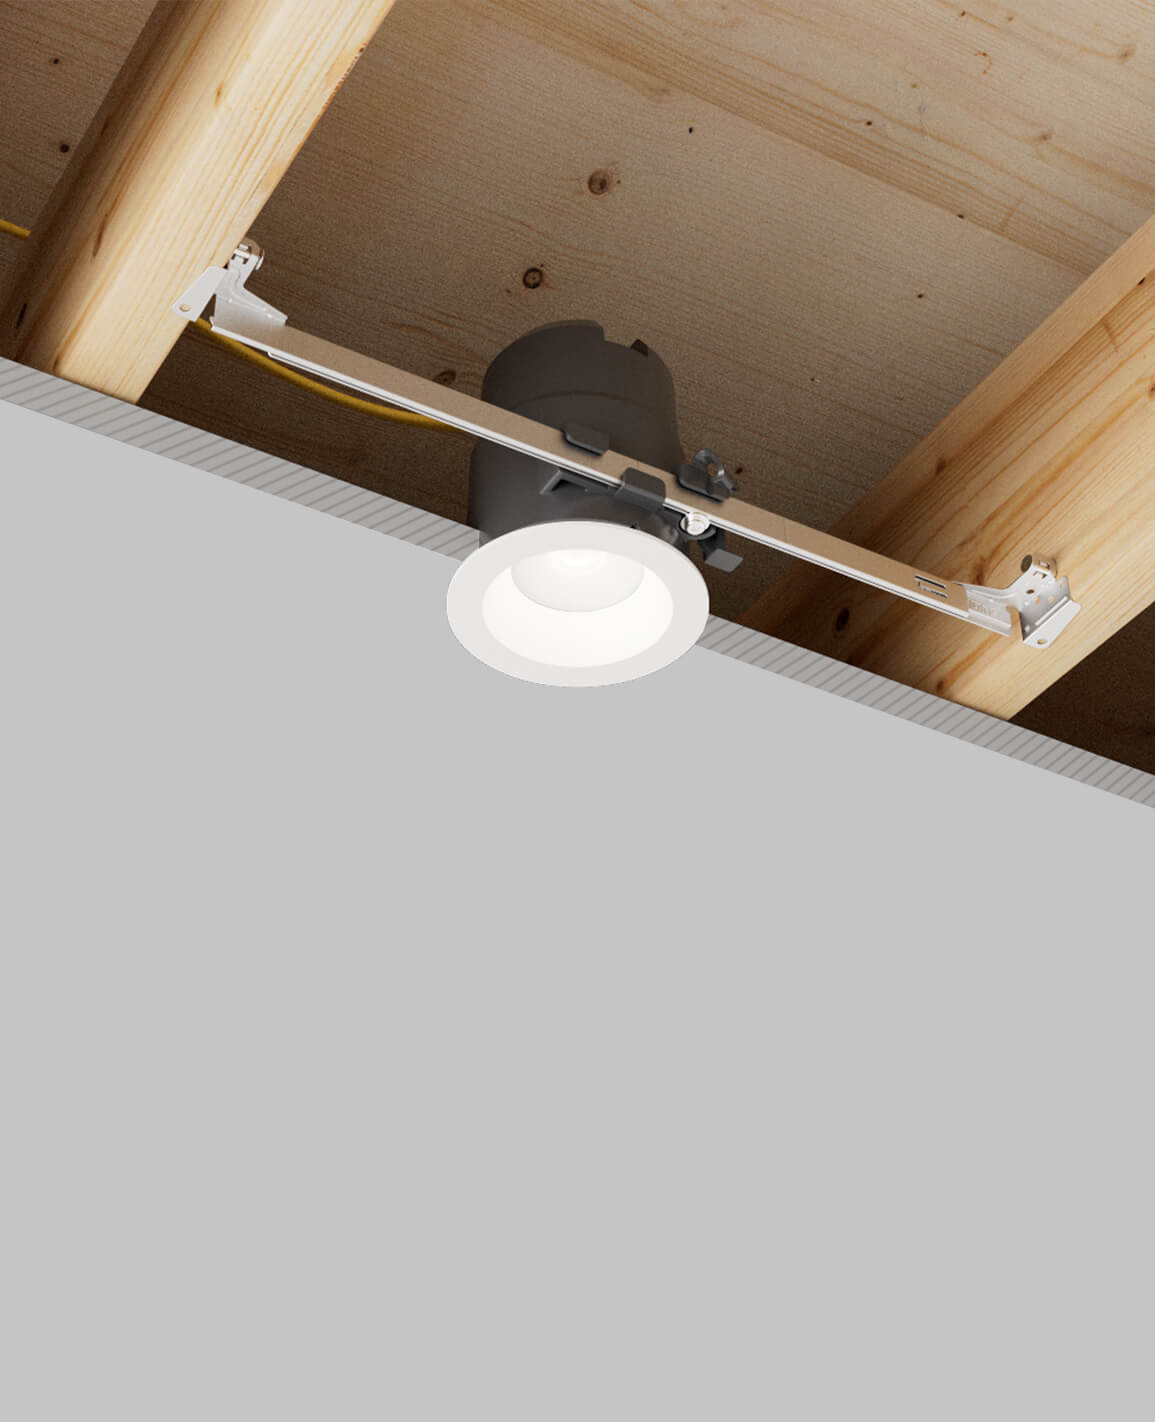 3" recessed light with bar hangers housing and surface white trim 